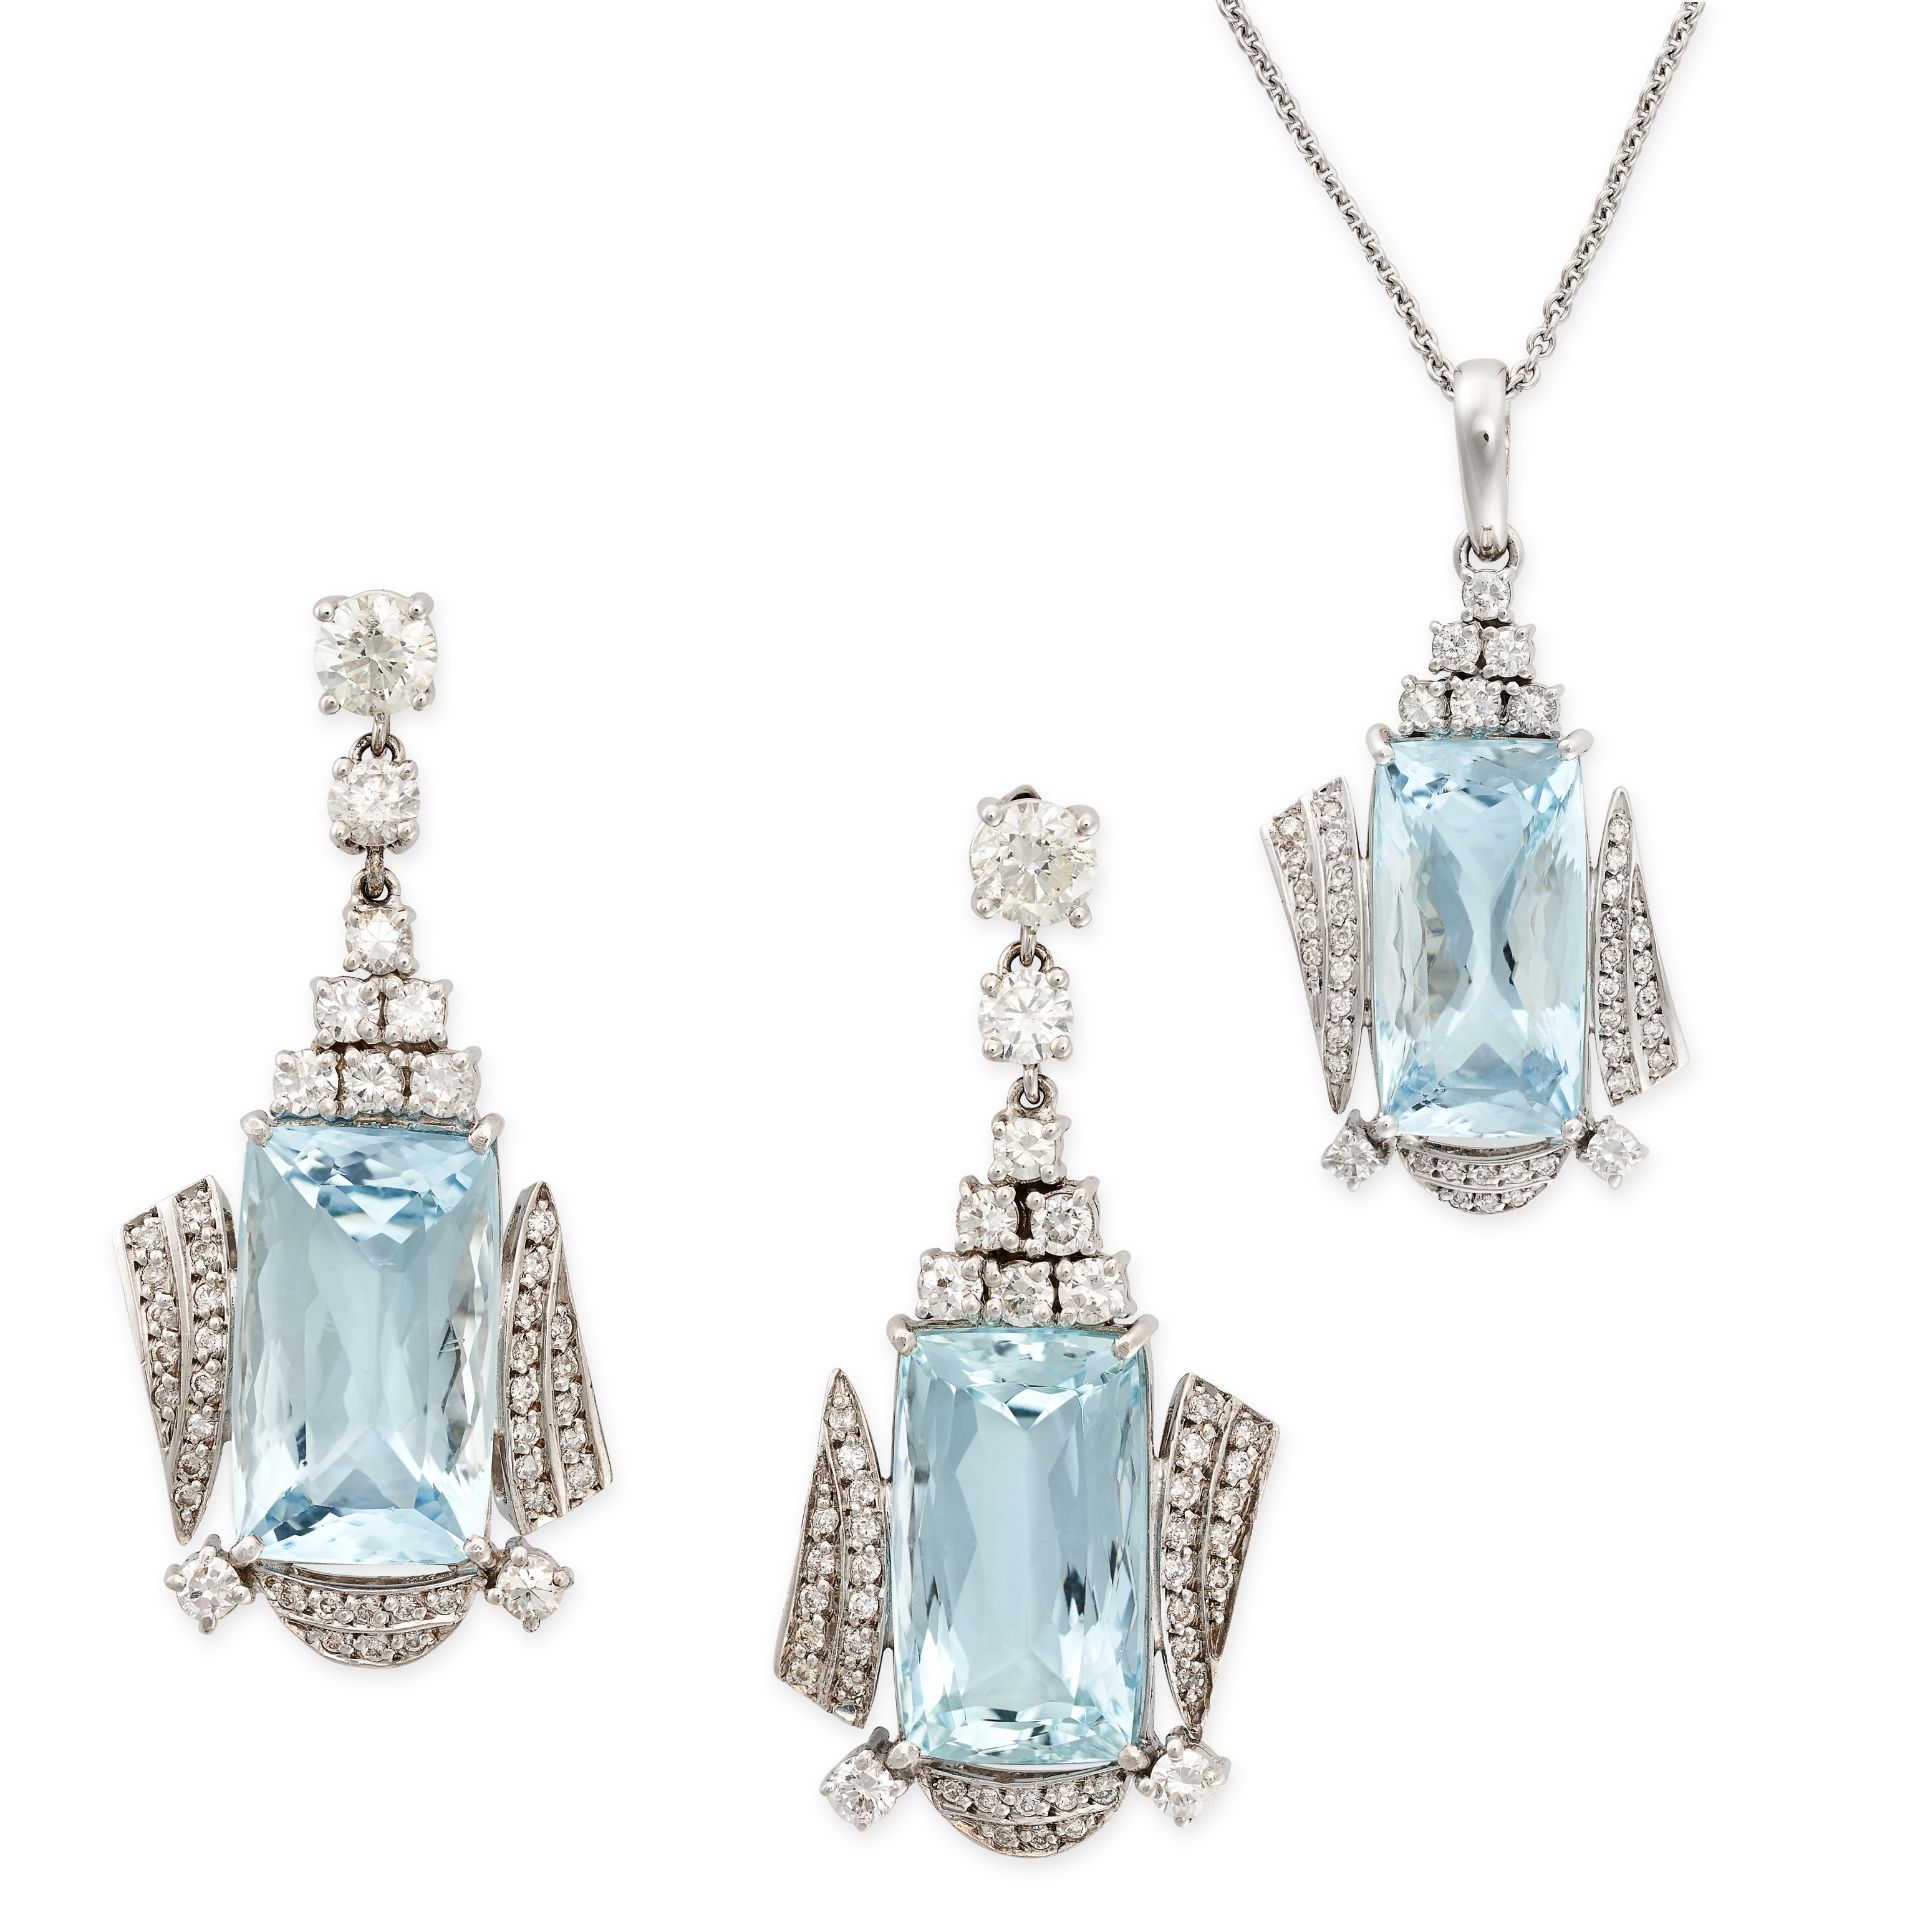 AN AQUAMARINE AND DIAMOND PENDANT AND EARRINGS SUITE in 18ct white gold, the pendant set with a c...